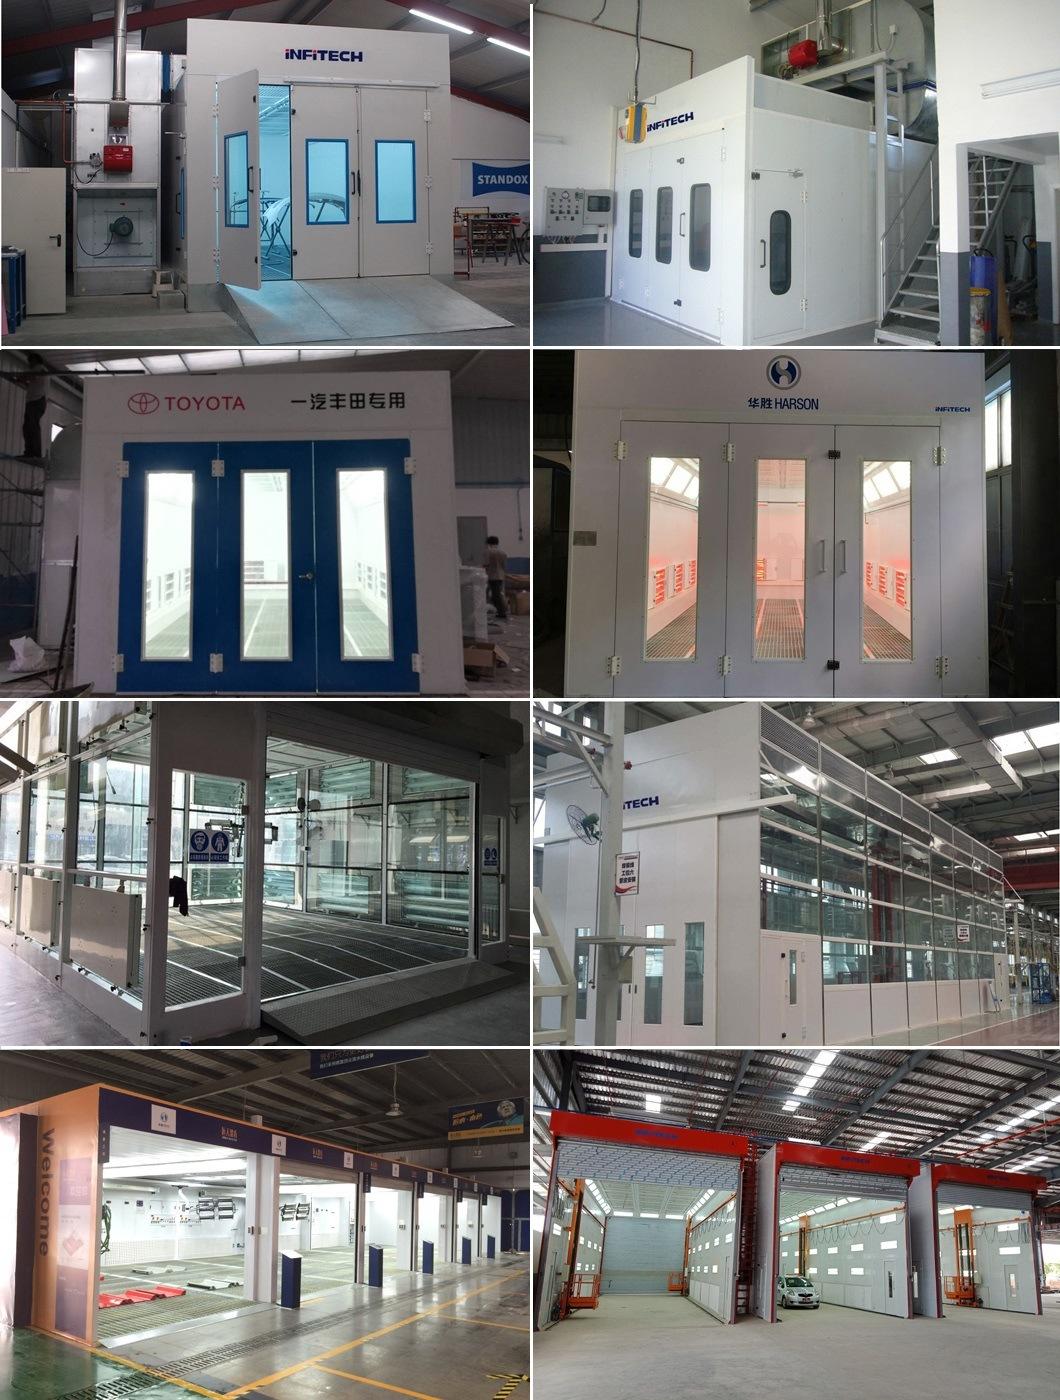 Chinese Big Spraying Booth Industrial Spray Booth CE Standard Customied Designer Paint Booth Full Down Draft